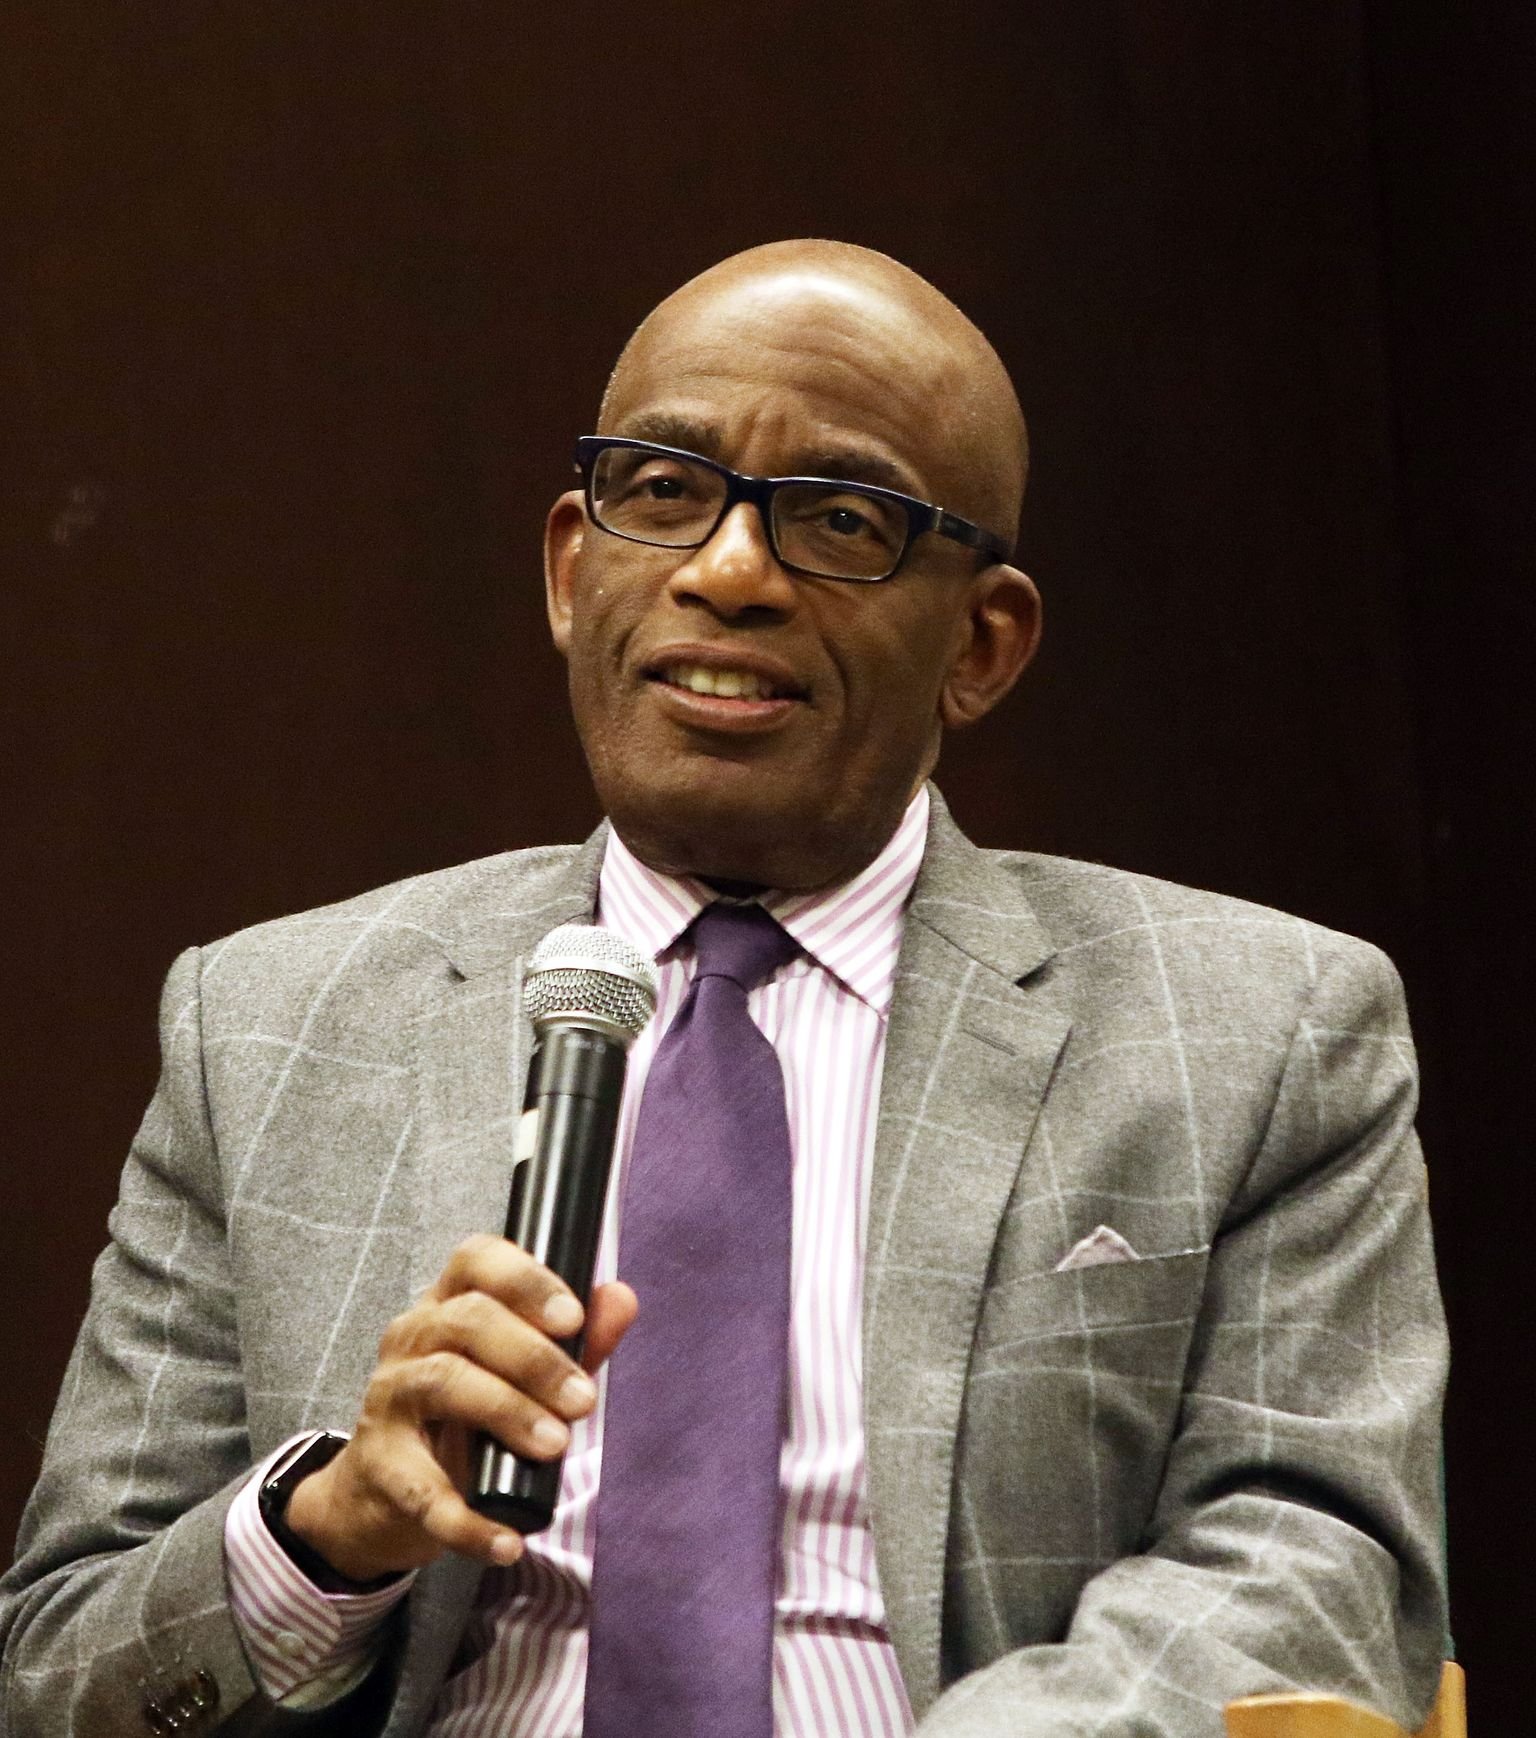 Al Roker promotes his book at Barnes & Noble 82nd Street on January 7, 2016 in New York City | Photo: Getty Images